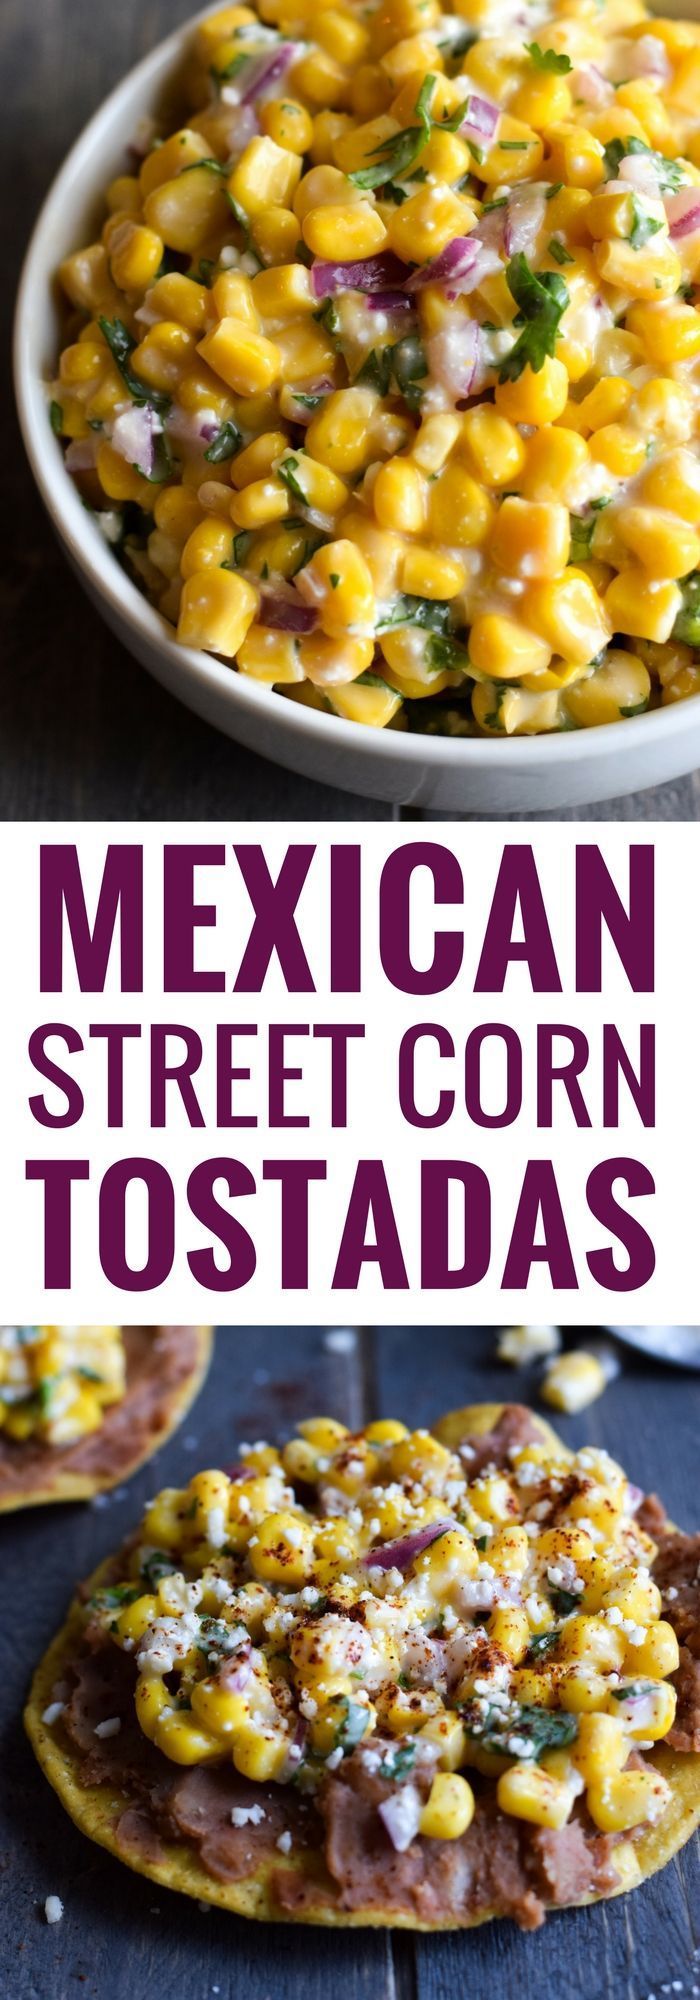 Ready in only 15 minutes, these Mexican Street Corn Tostadas made with canned corn, cotija cheese and chopped cilantro make for an